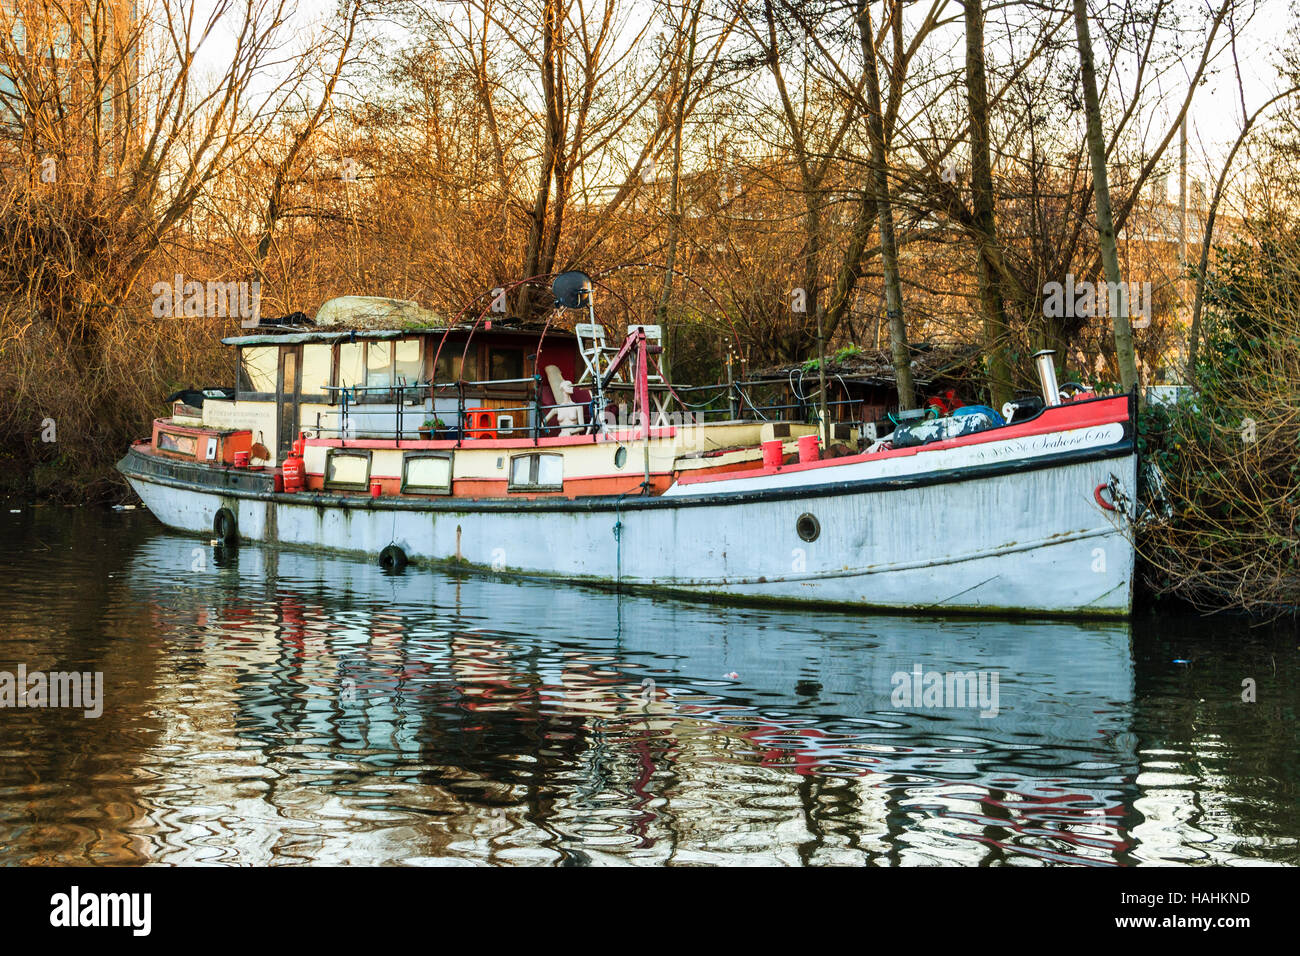 Seahorse, a boat moored on Regent's Canal by Camley Street Nature Reserve, King's Cross, London, UK Stock Photo